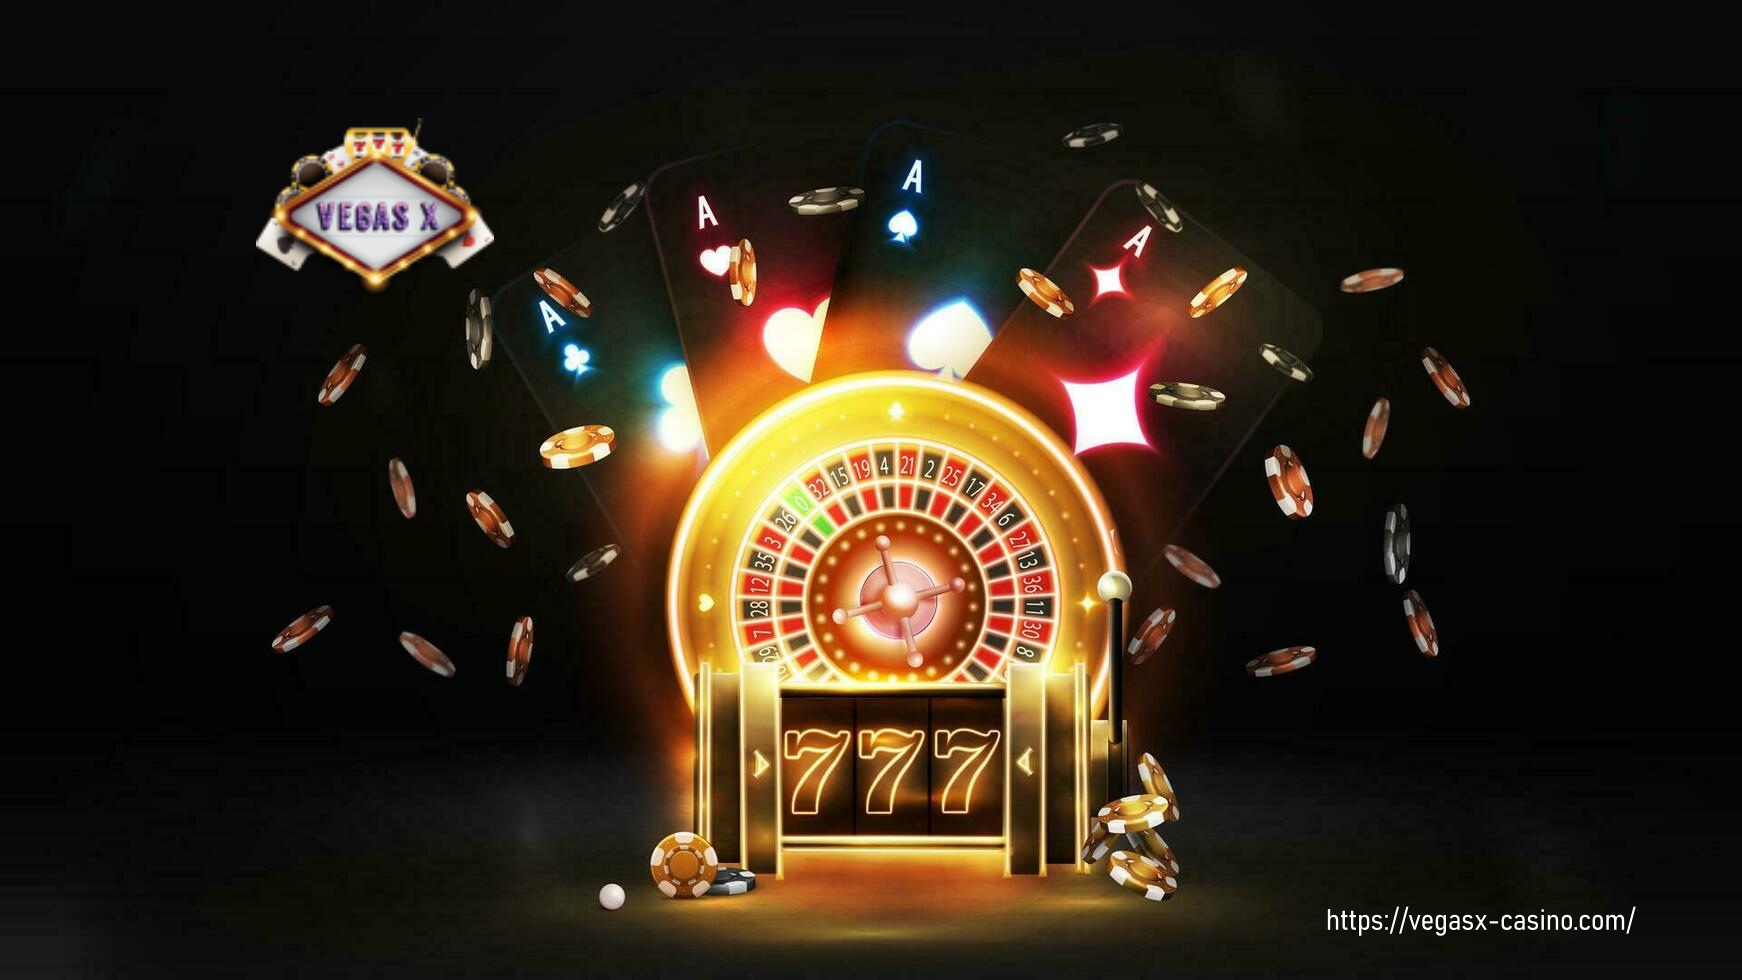 Vegas X: Discover the Best Online Casino Games and Bonuses